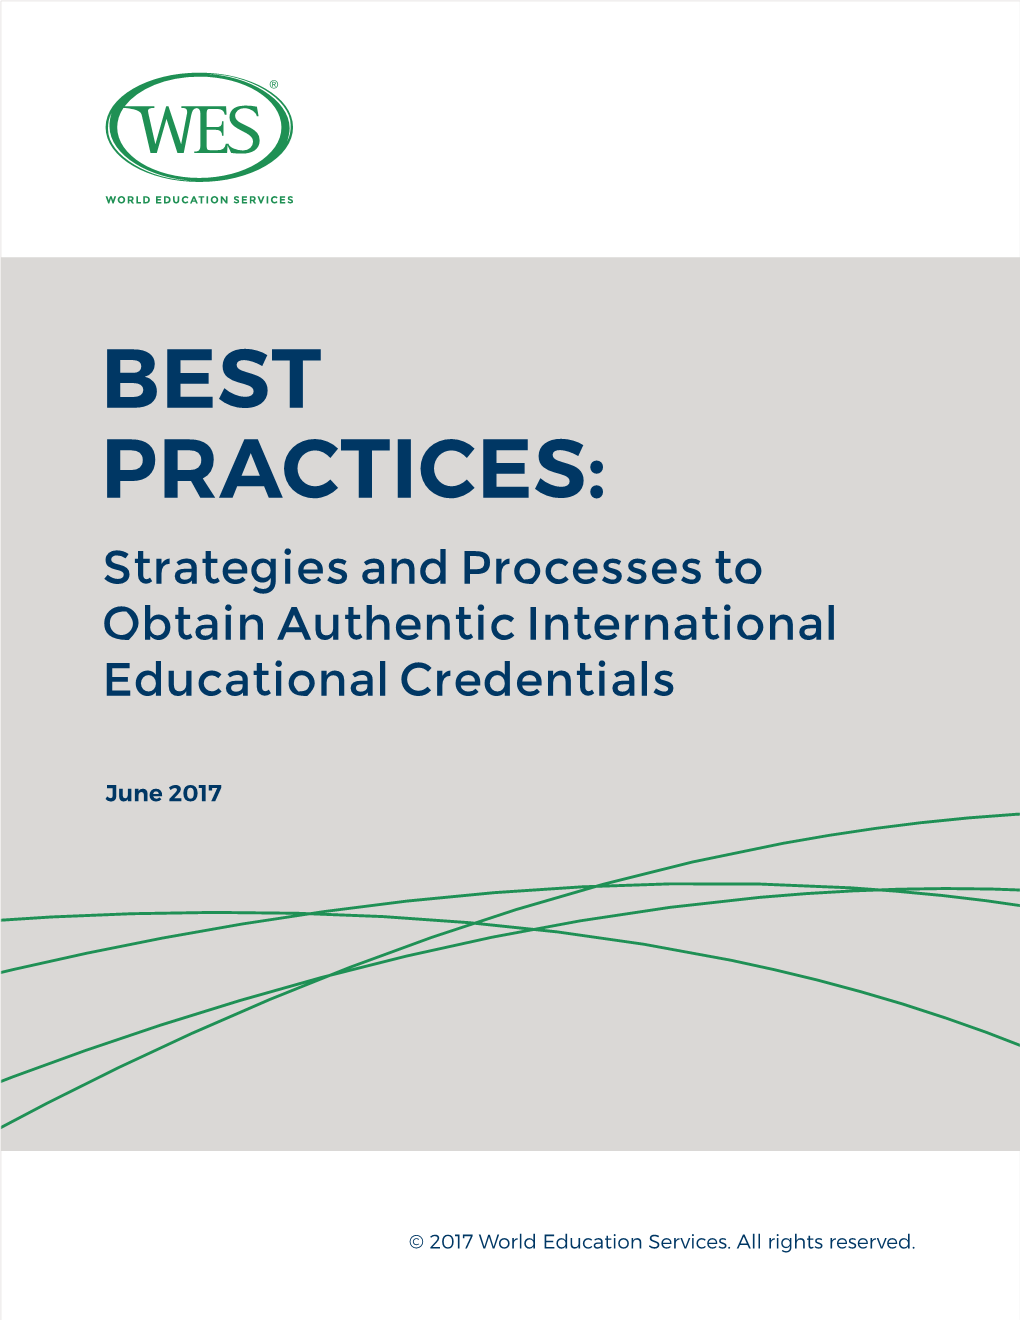 BEST PRACTICES: Strategies and Processes to Obtain Authentic International Educational Credentials